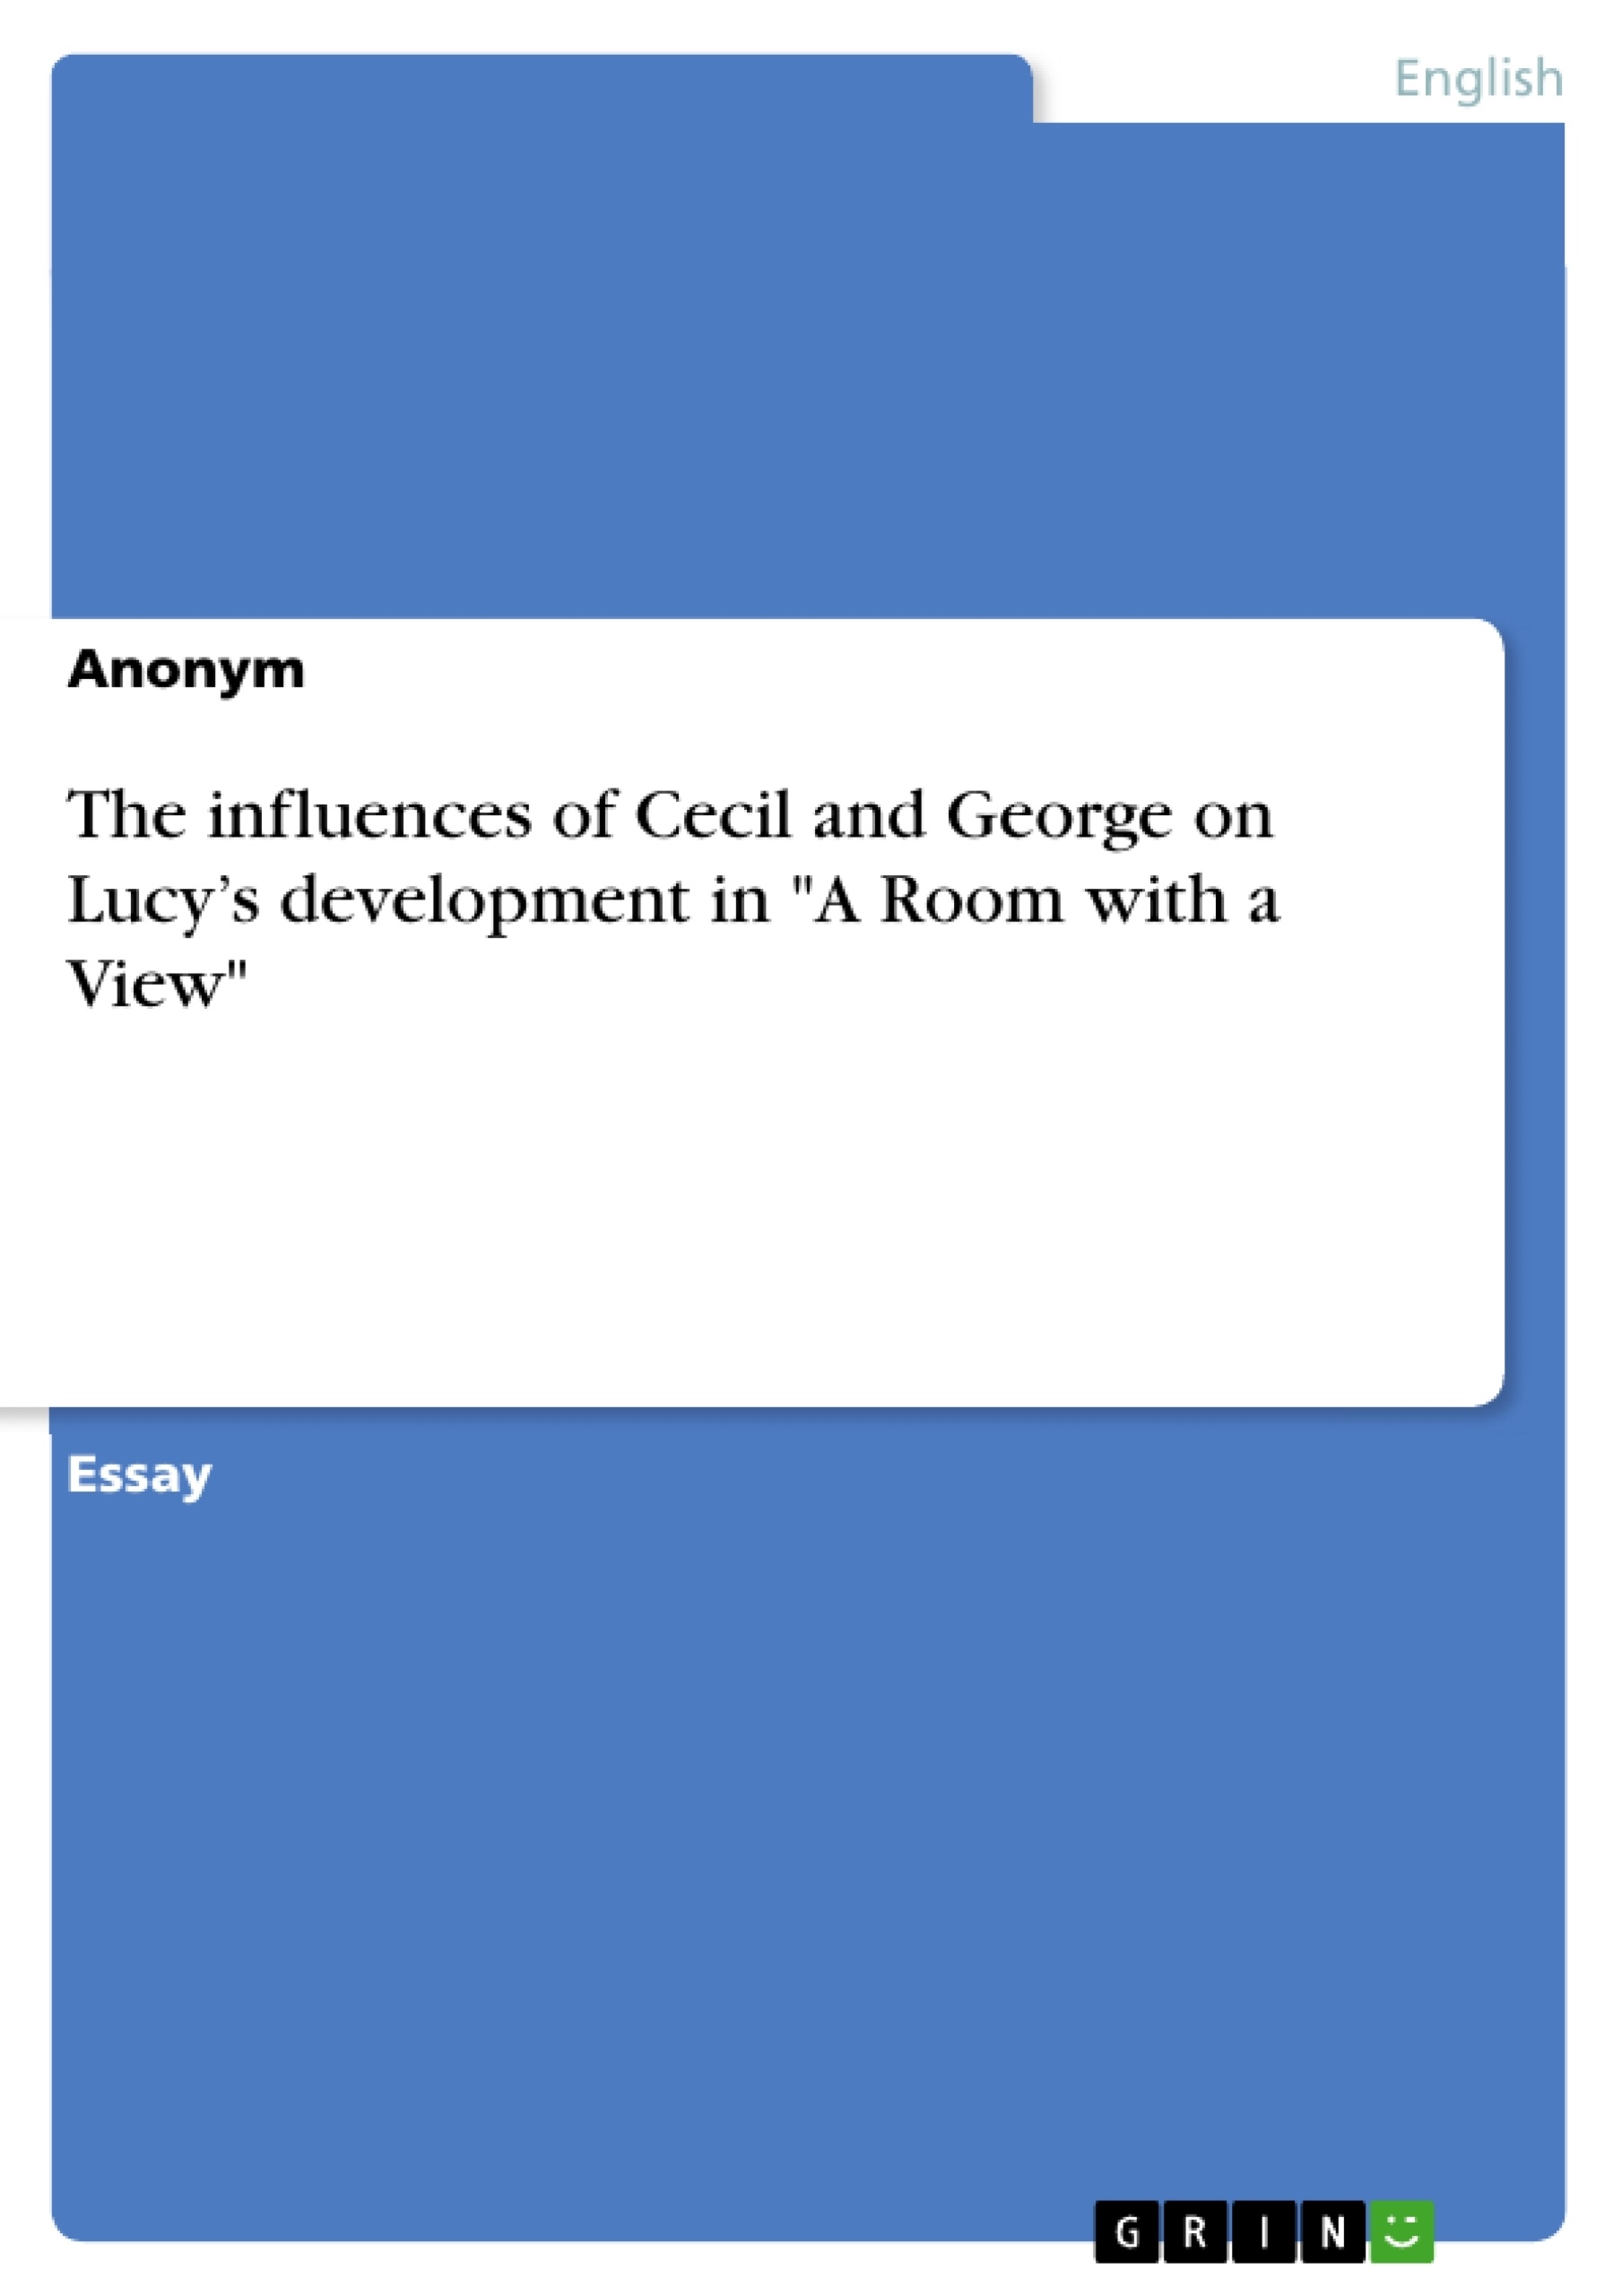 Title: The influences of Cecil and George on Lucy’s development in "A Room with a View"